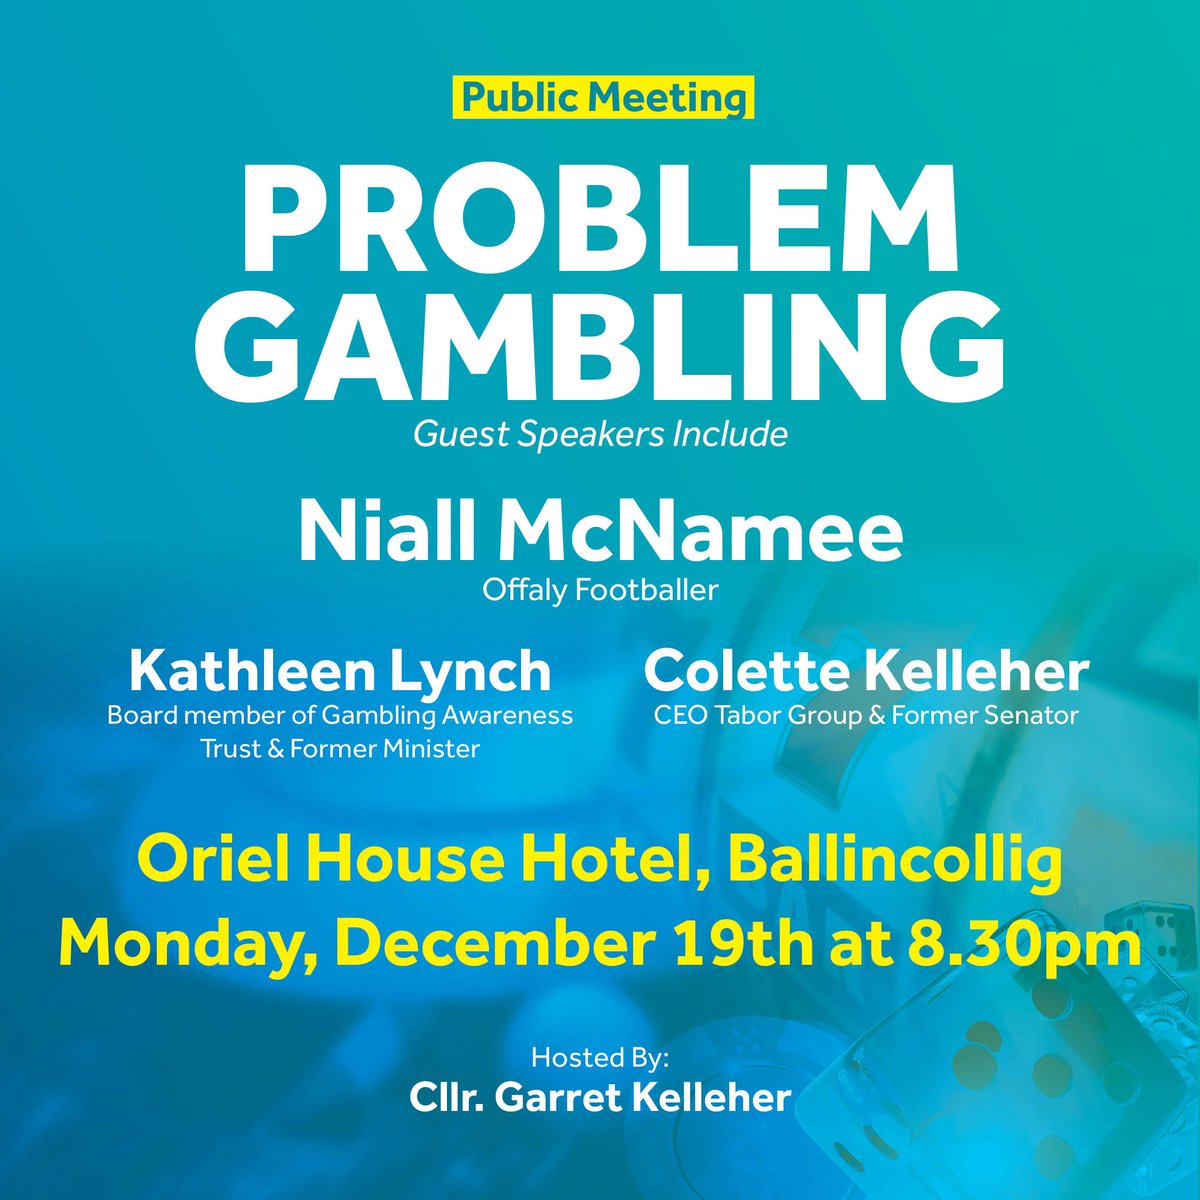 Public Meeting on Problem Gambling in @OrielHouseCork on Monday, 19th December at 8.30 p.m. @niallmc14 @KathleenLynch05 & @ColetteKelleher will lead the discussion. All are welcome. #ProblemGambling